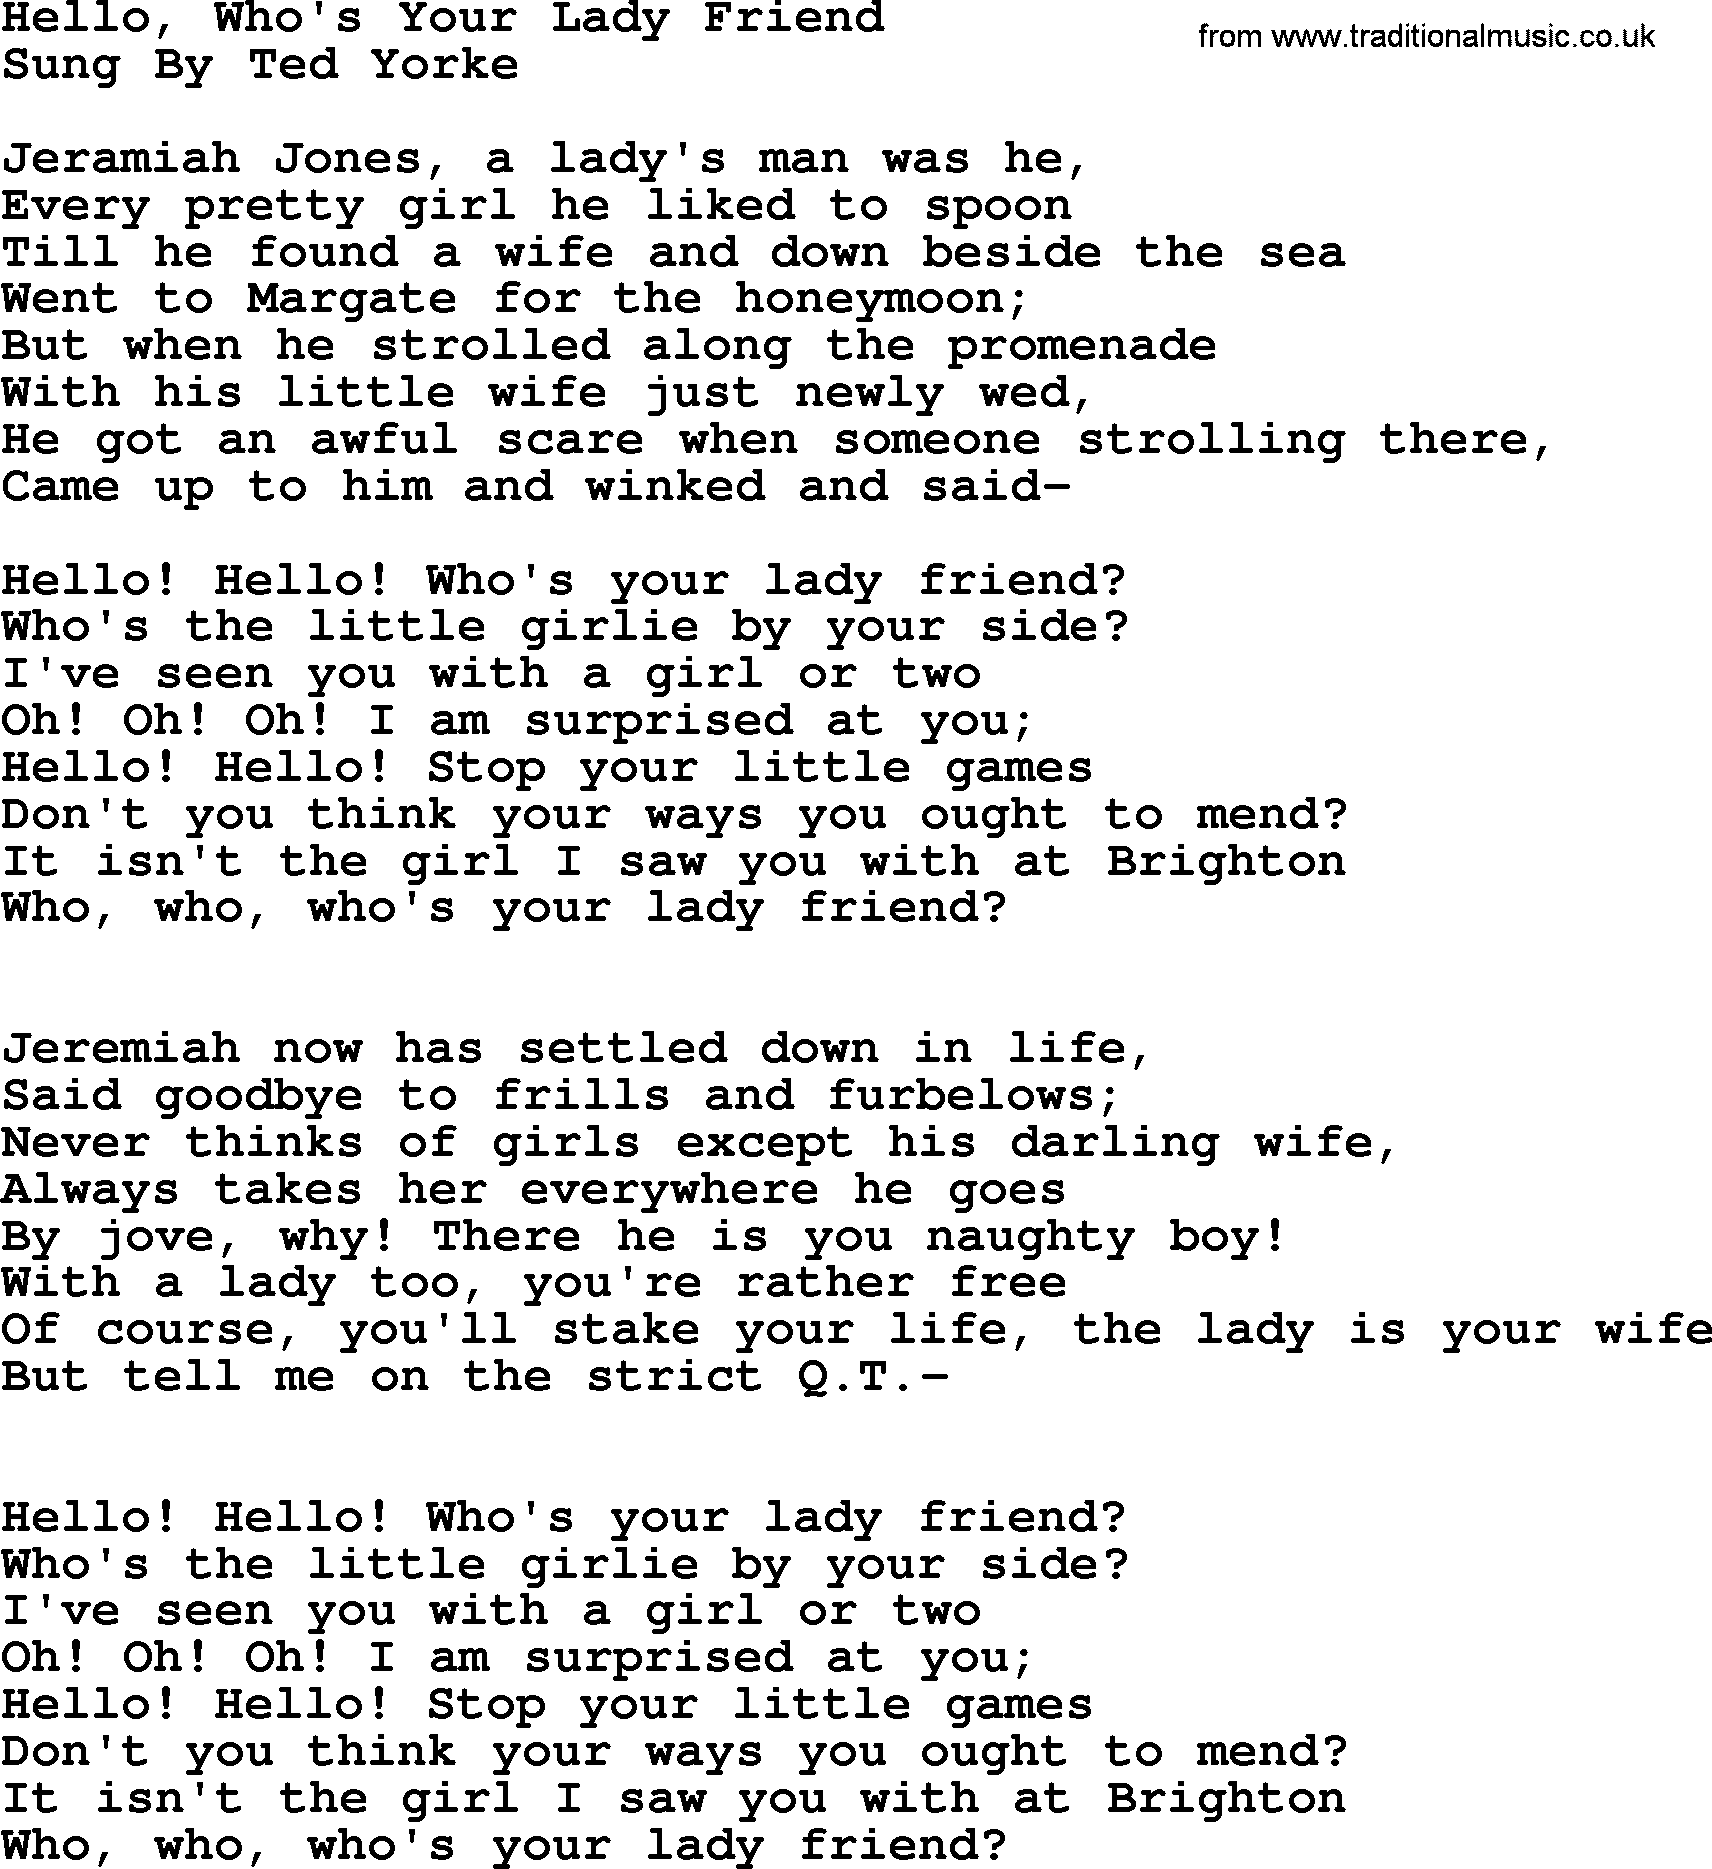 World War(WW1) One Song: Hello, Who's Your Lady Friend, lyrics and PDF